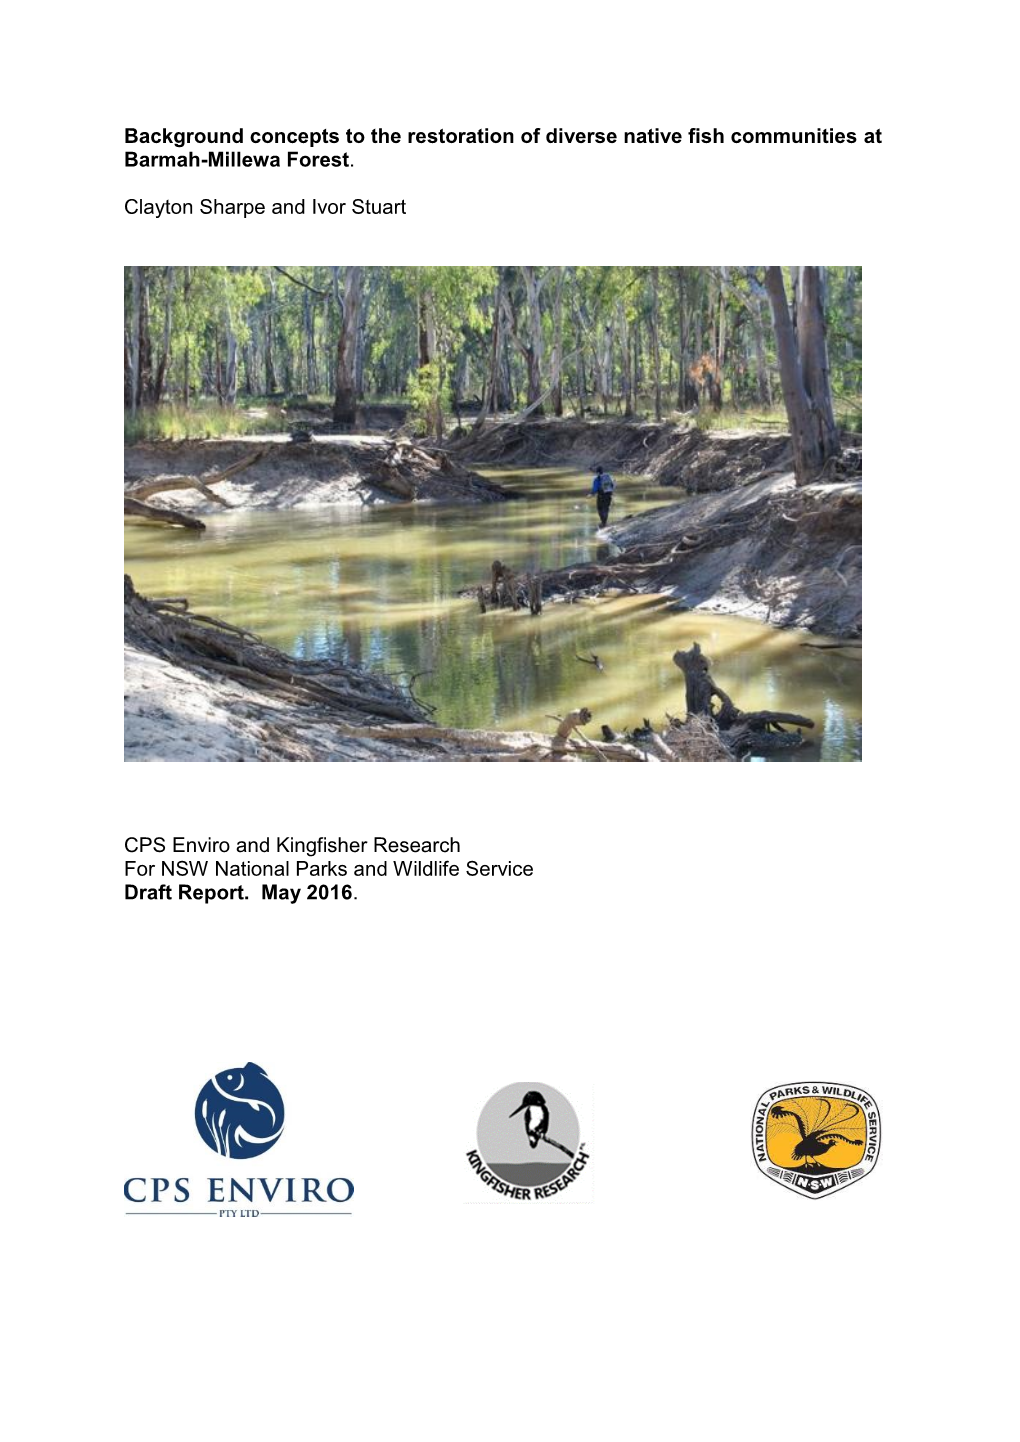 Background Concepts to the Restoration of Diverse Native Fish Communities at Barmah-Millewa Forest